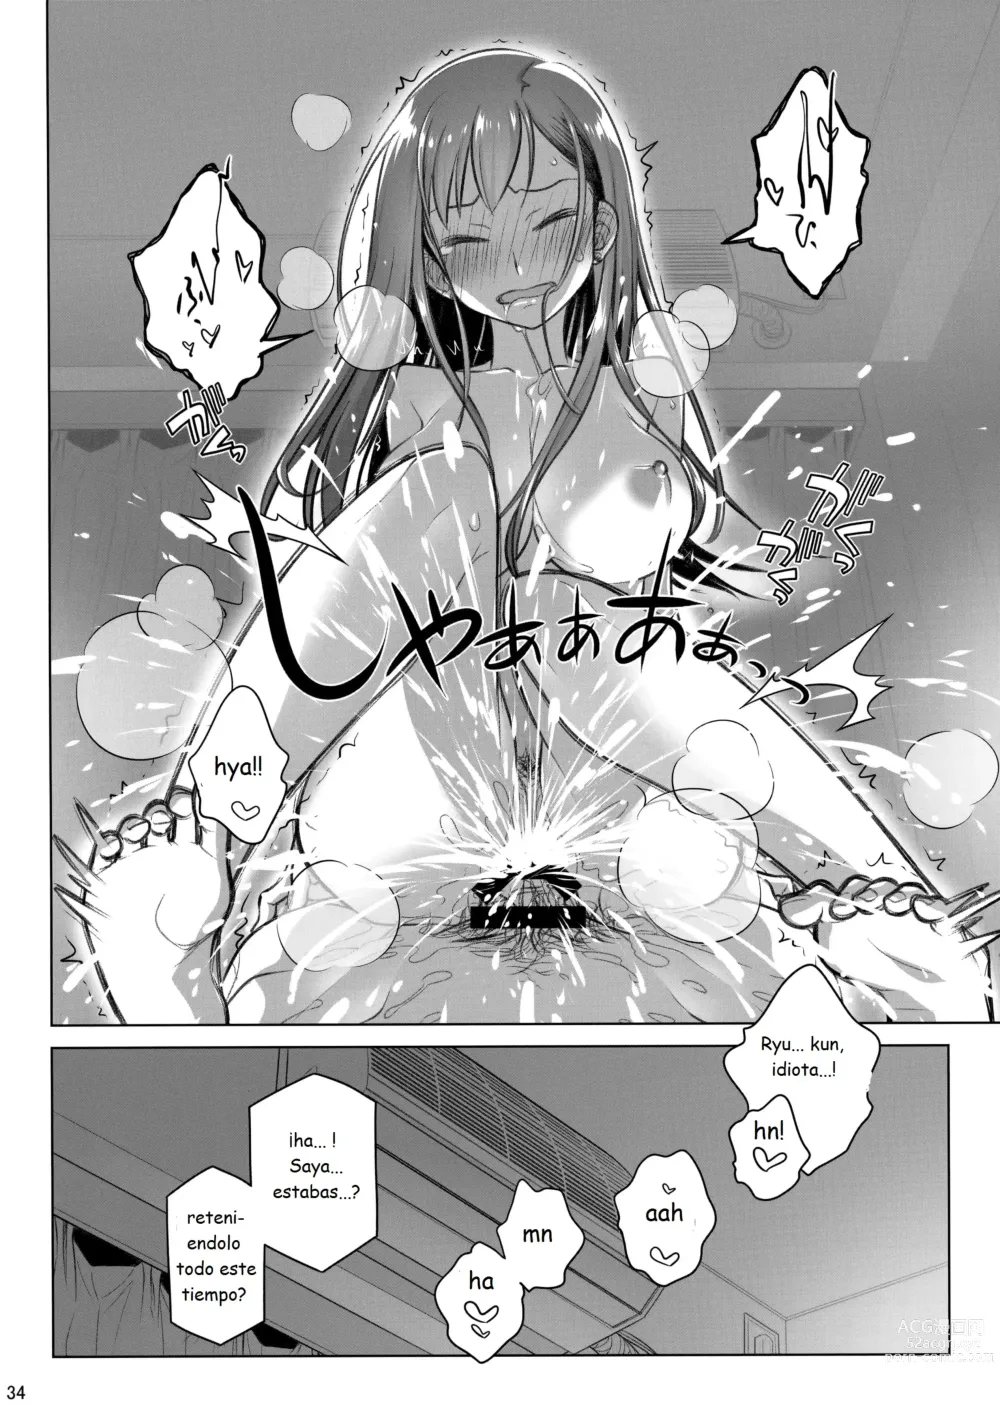 Page 34 of doujinshi Stay by Me Bangaihen